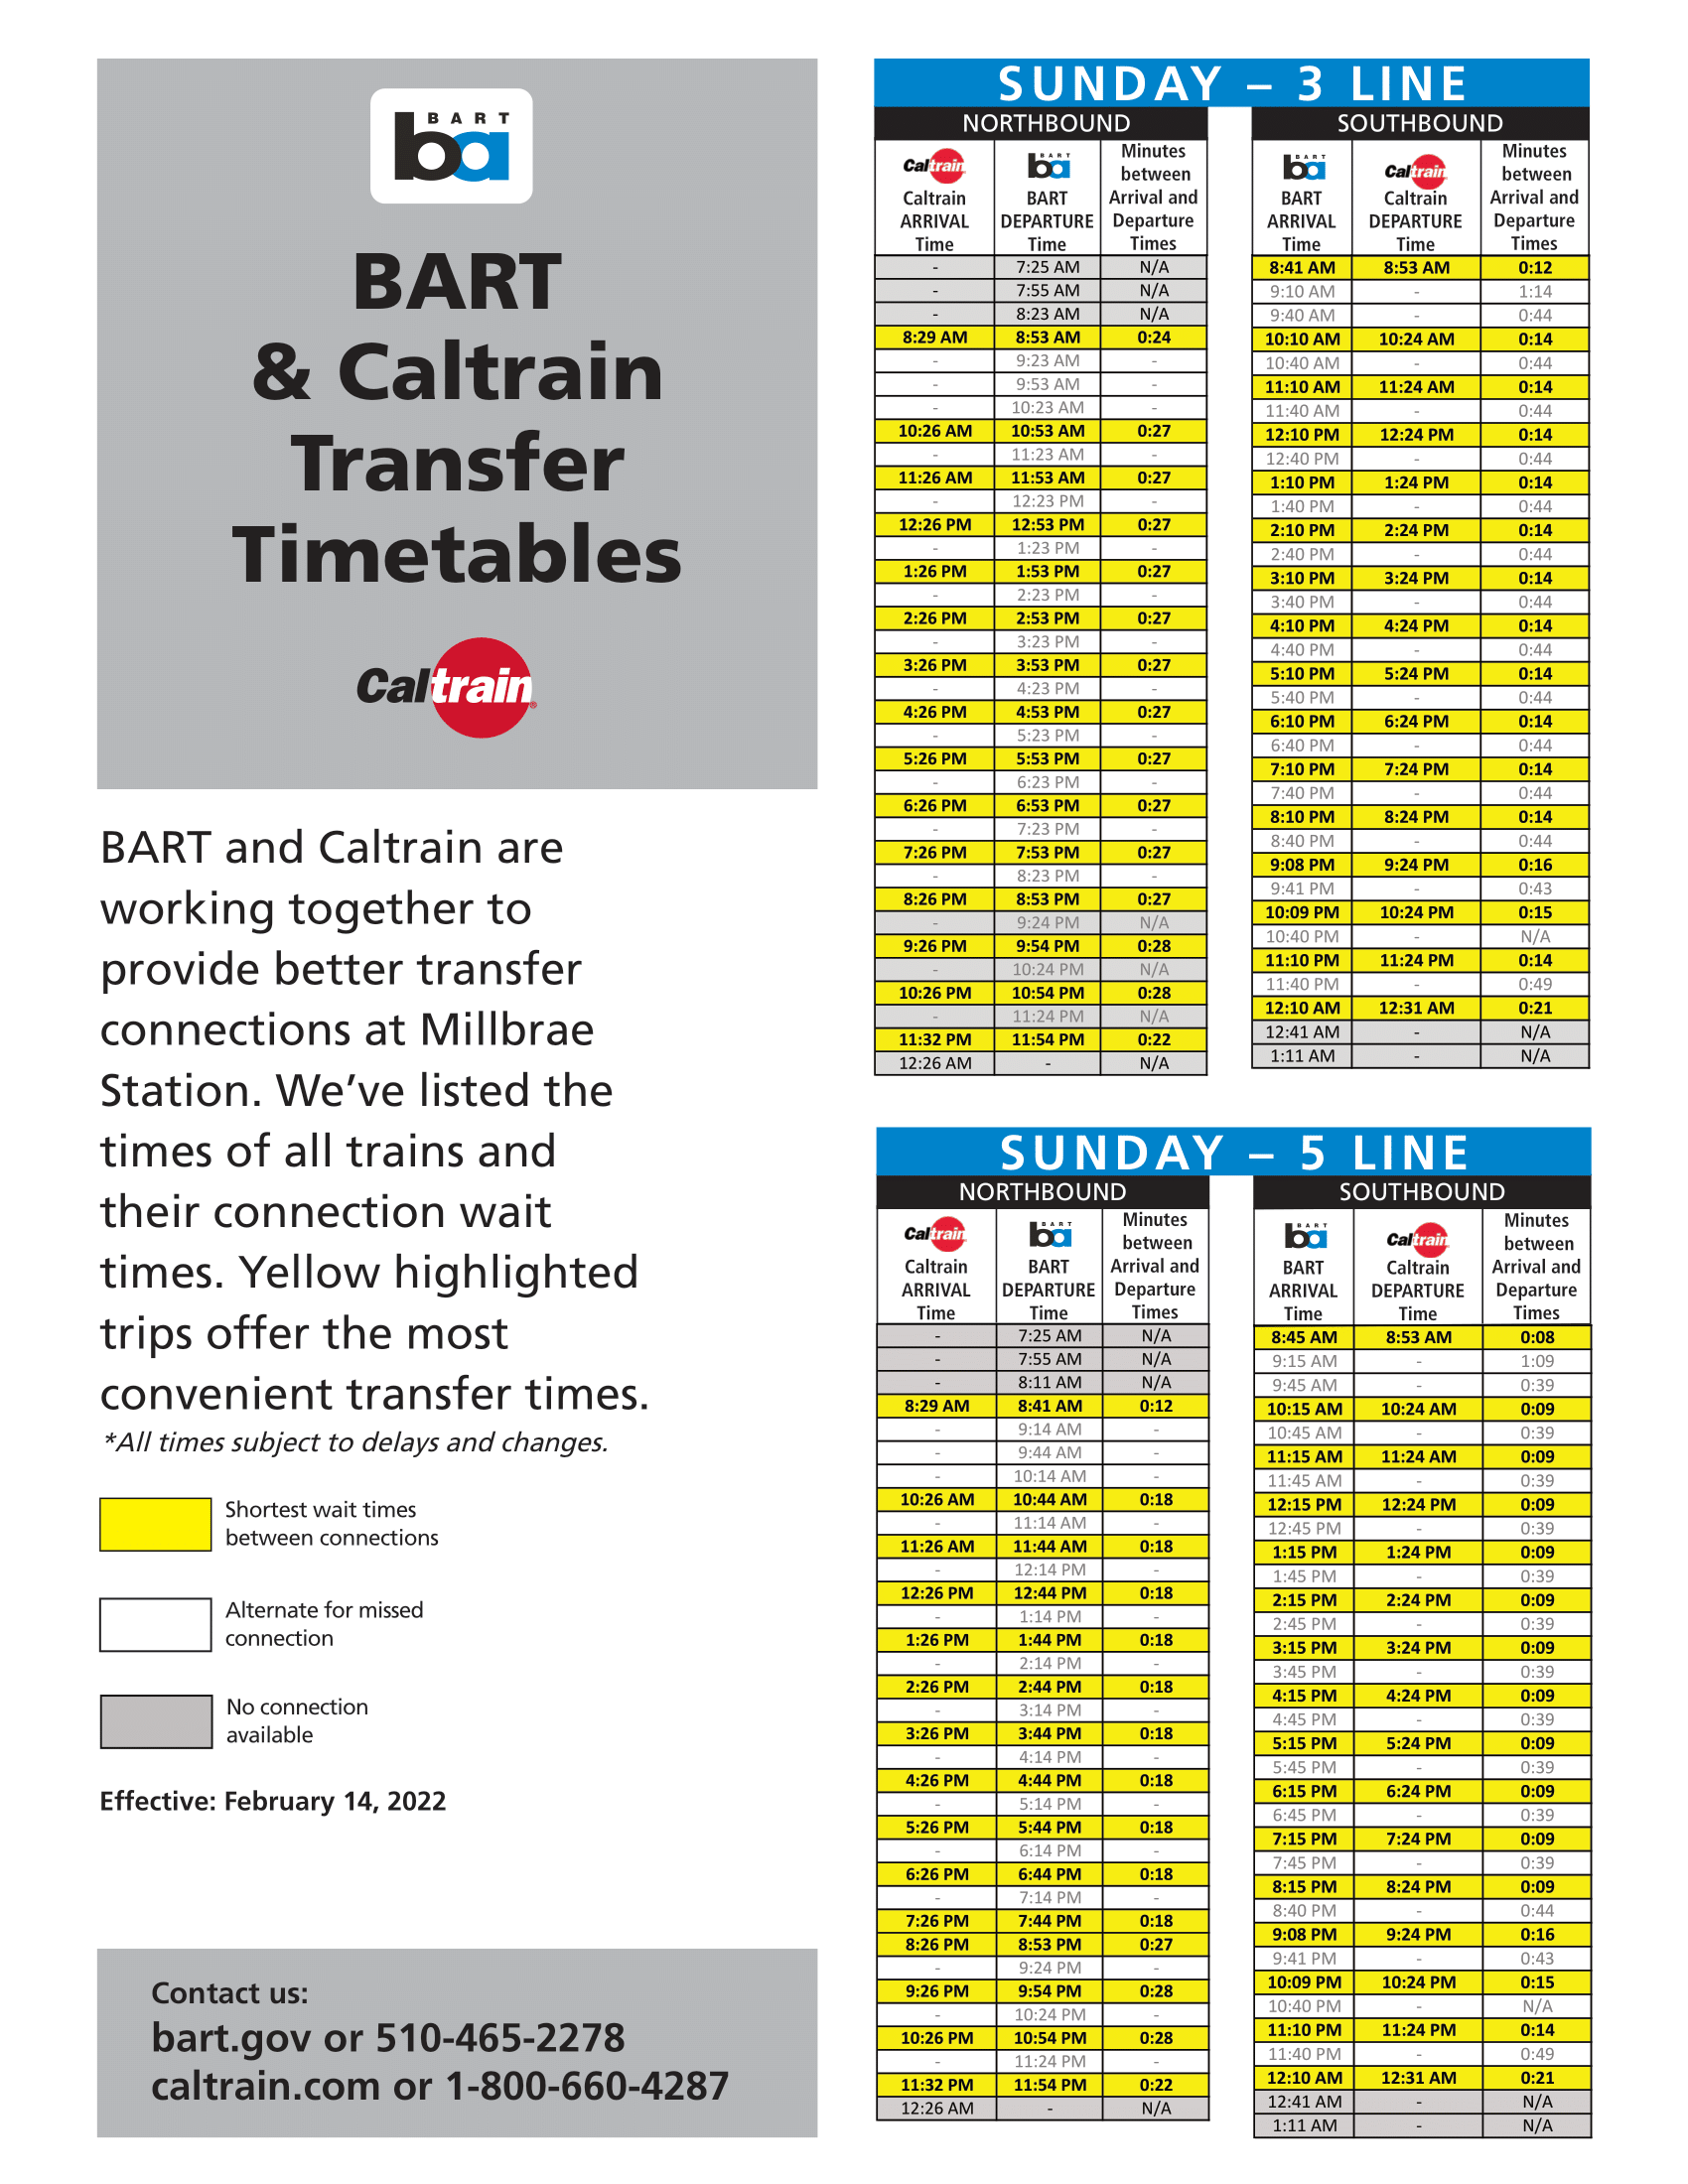 Sunday BART and Caltrain transfer times reflecting February 14, 2022 schedule change